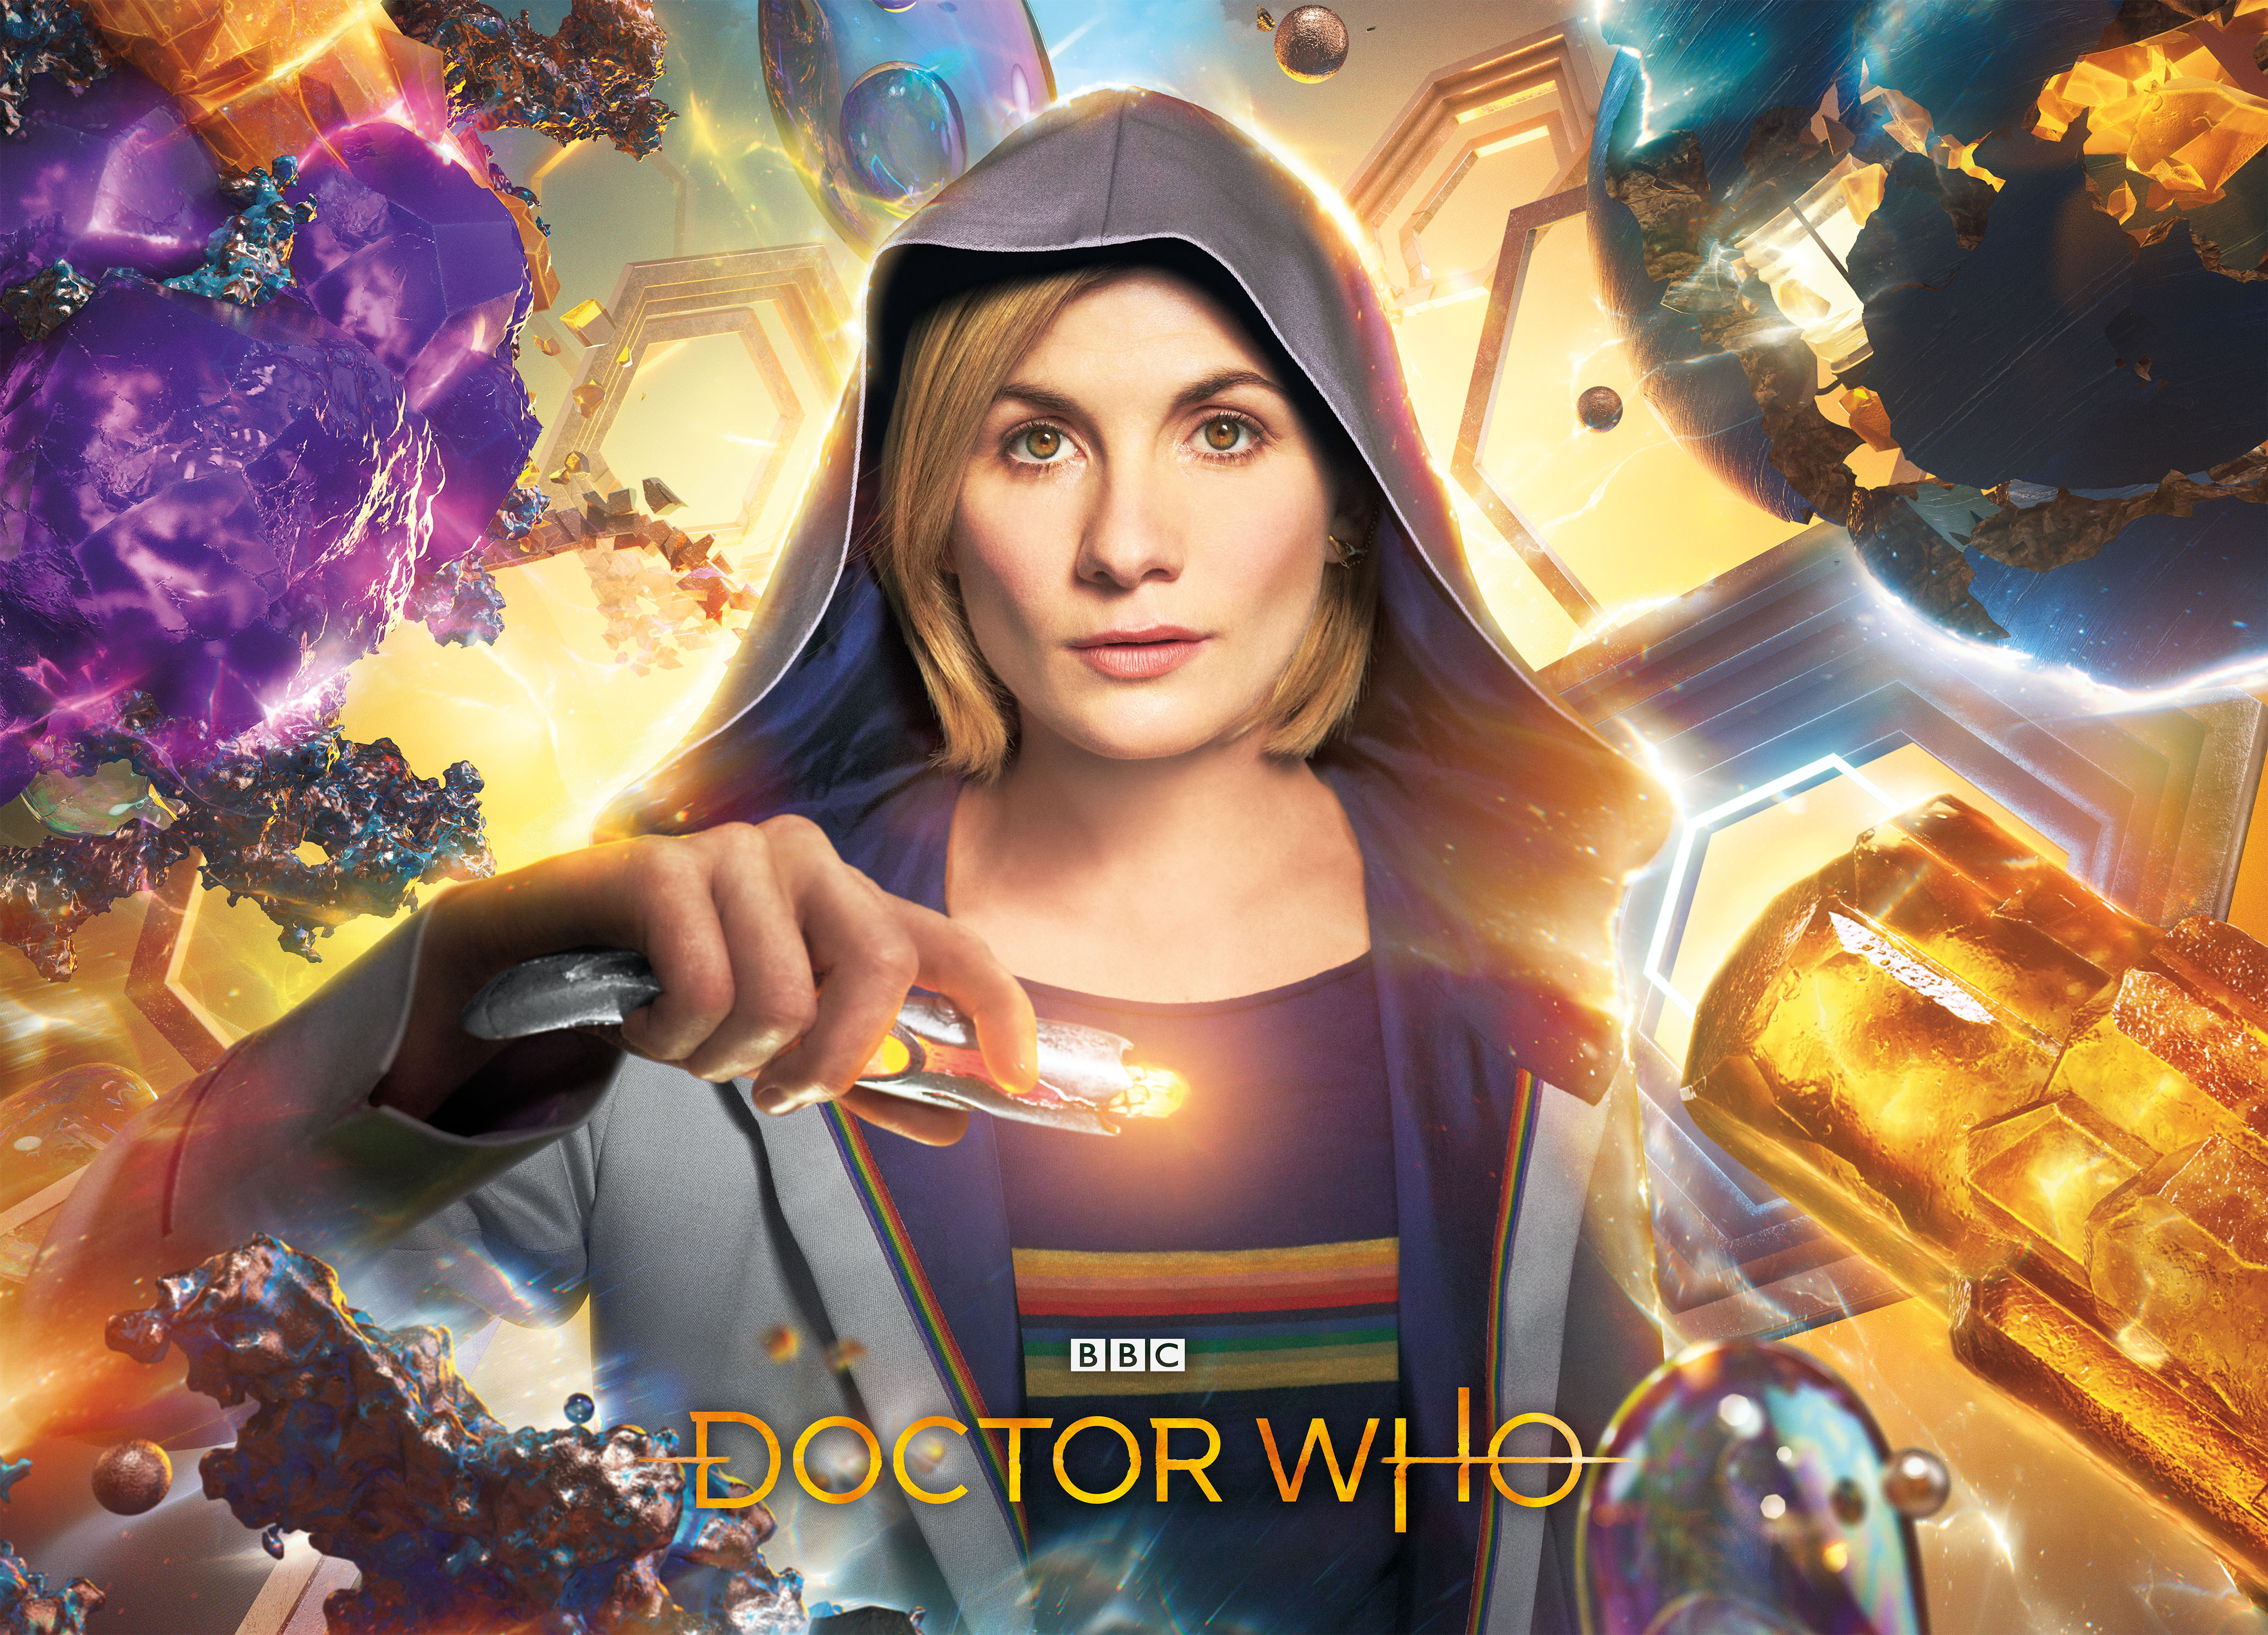 13th Doctor Jodie Whittaker 4126x2974